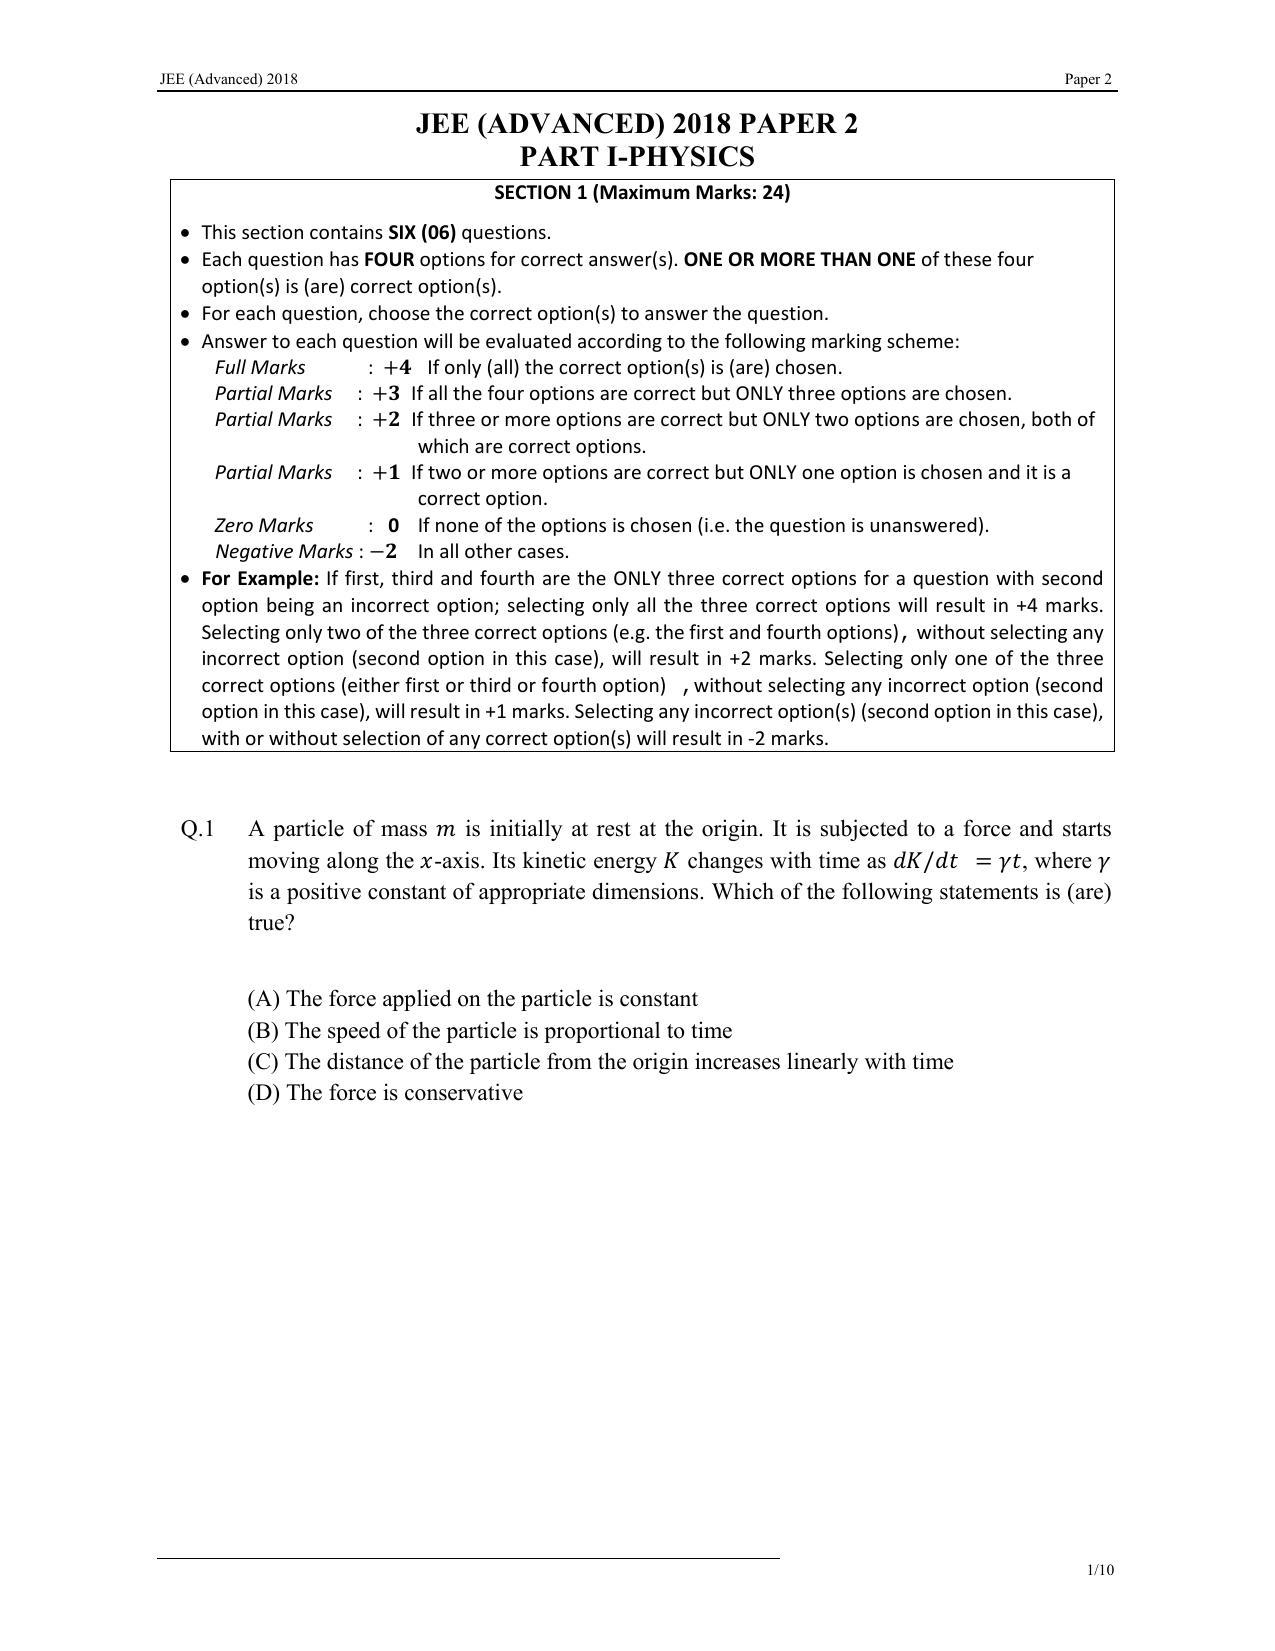 JEE (Advanced) 2018 Paper II Question Paper - Page 1